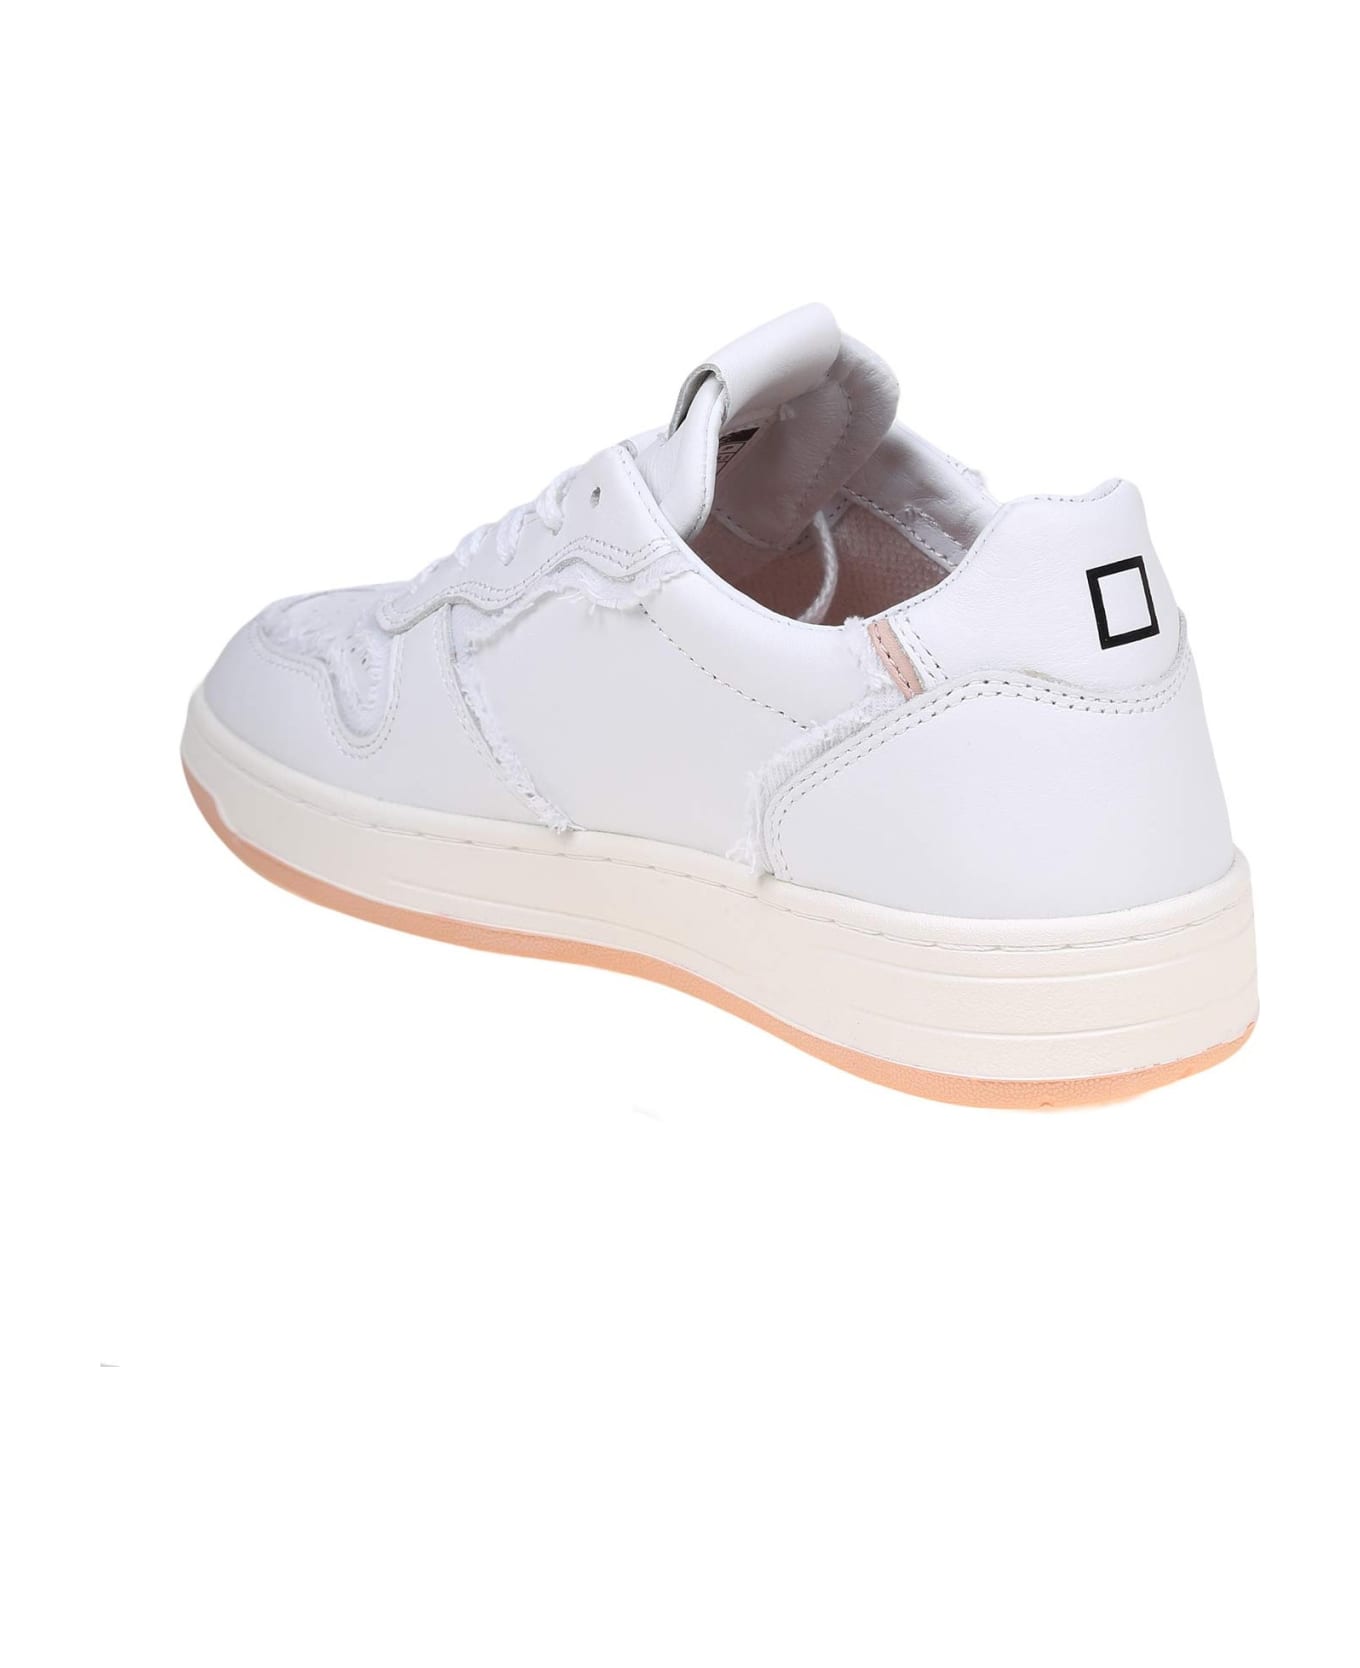 D.A.T.E. Court Sneakers In White Leather - Peach